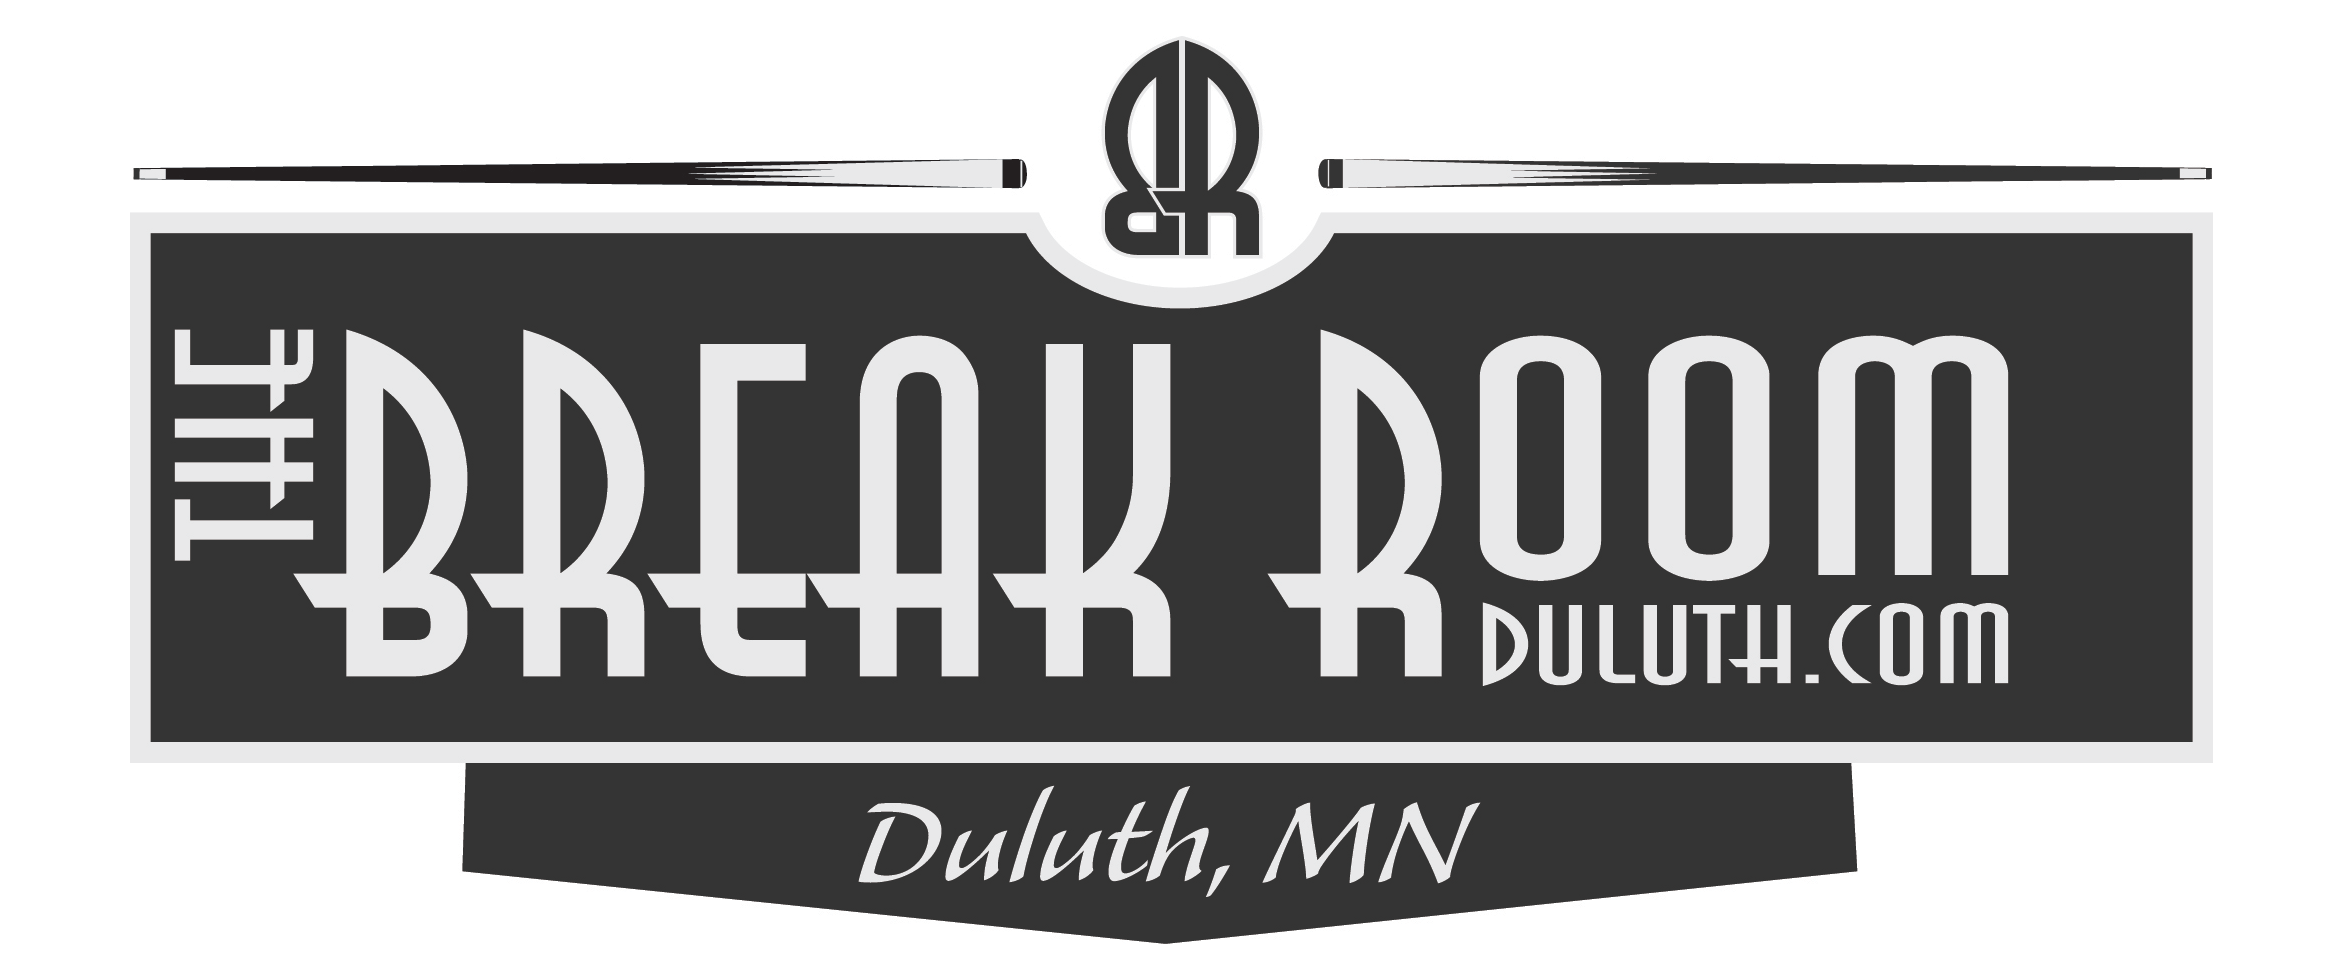 Welcome Players From The Break Room Duluth